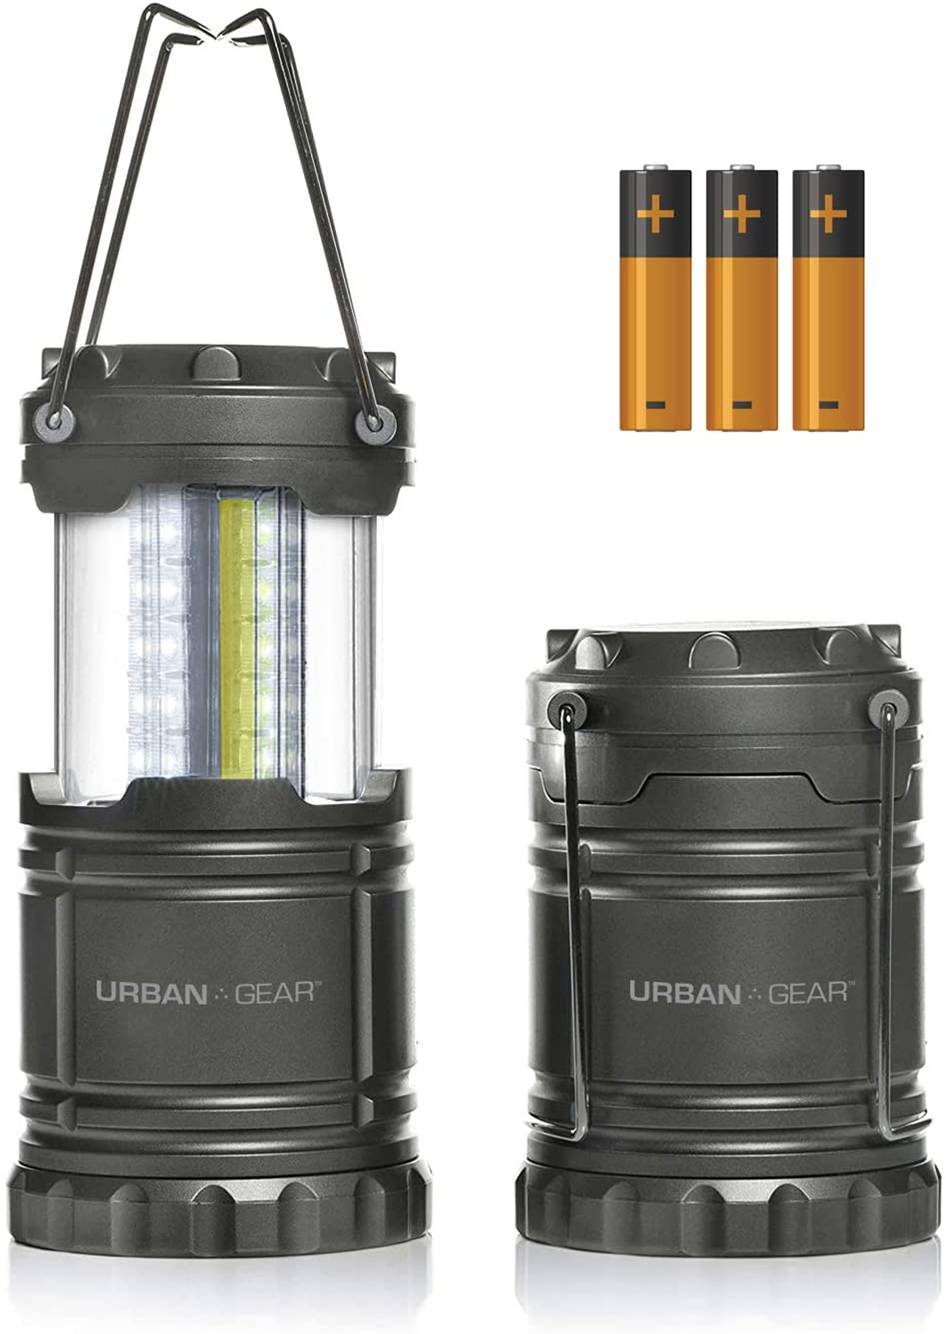 Waterproof Emergency Flashlight w/LED Lights (300 Lumens) Any Outdoors Activity, Portable Pop Up Indoor/Outdoor Camping Lantern + Single